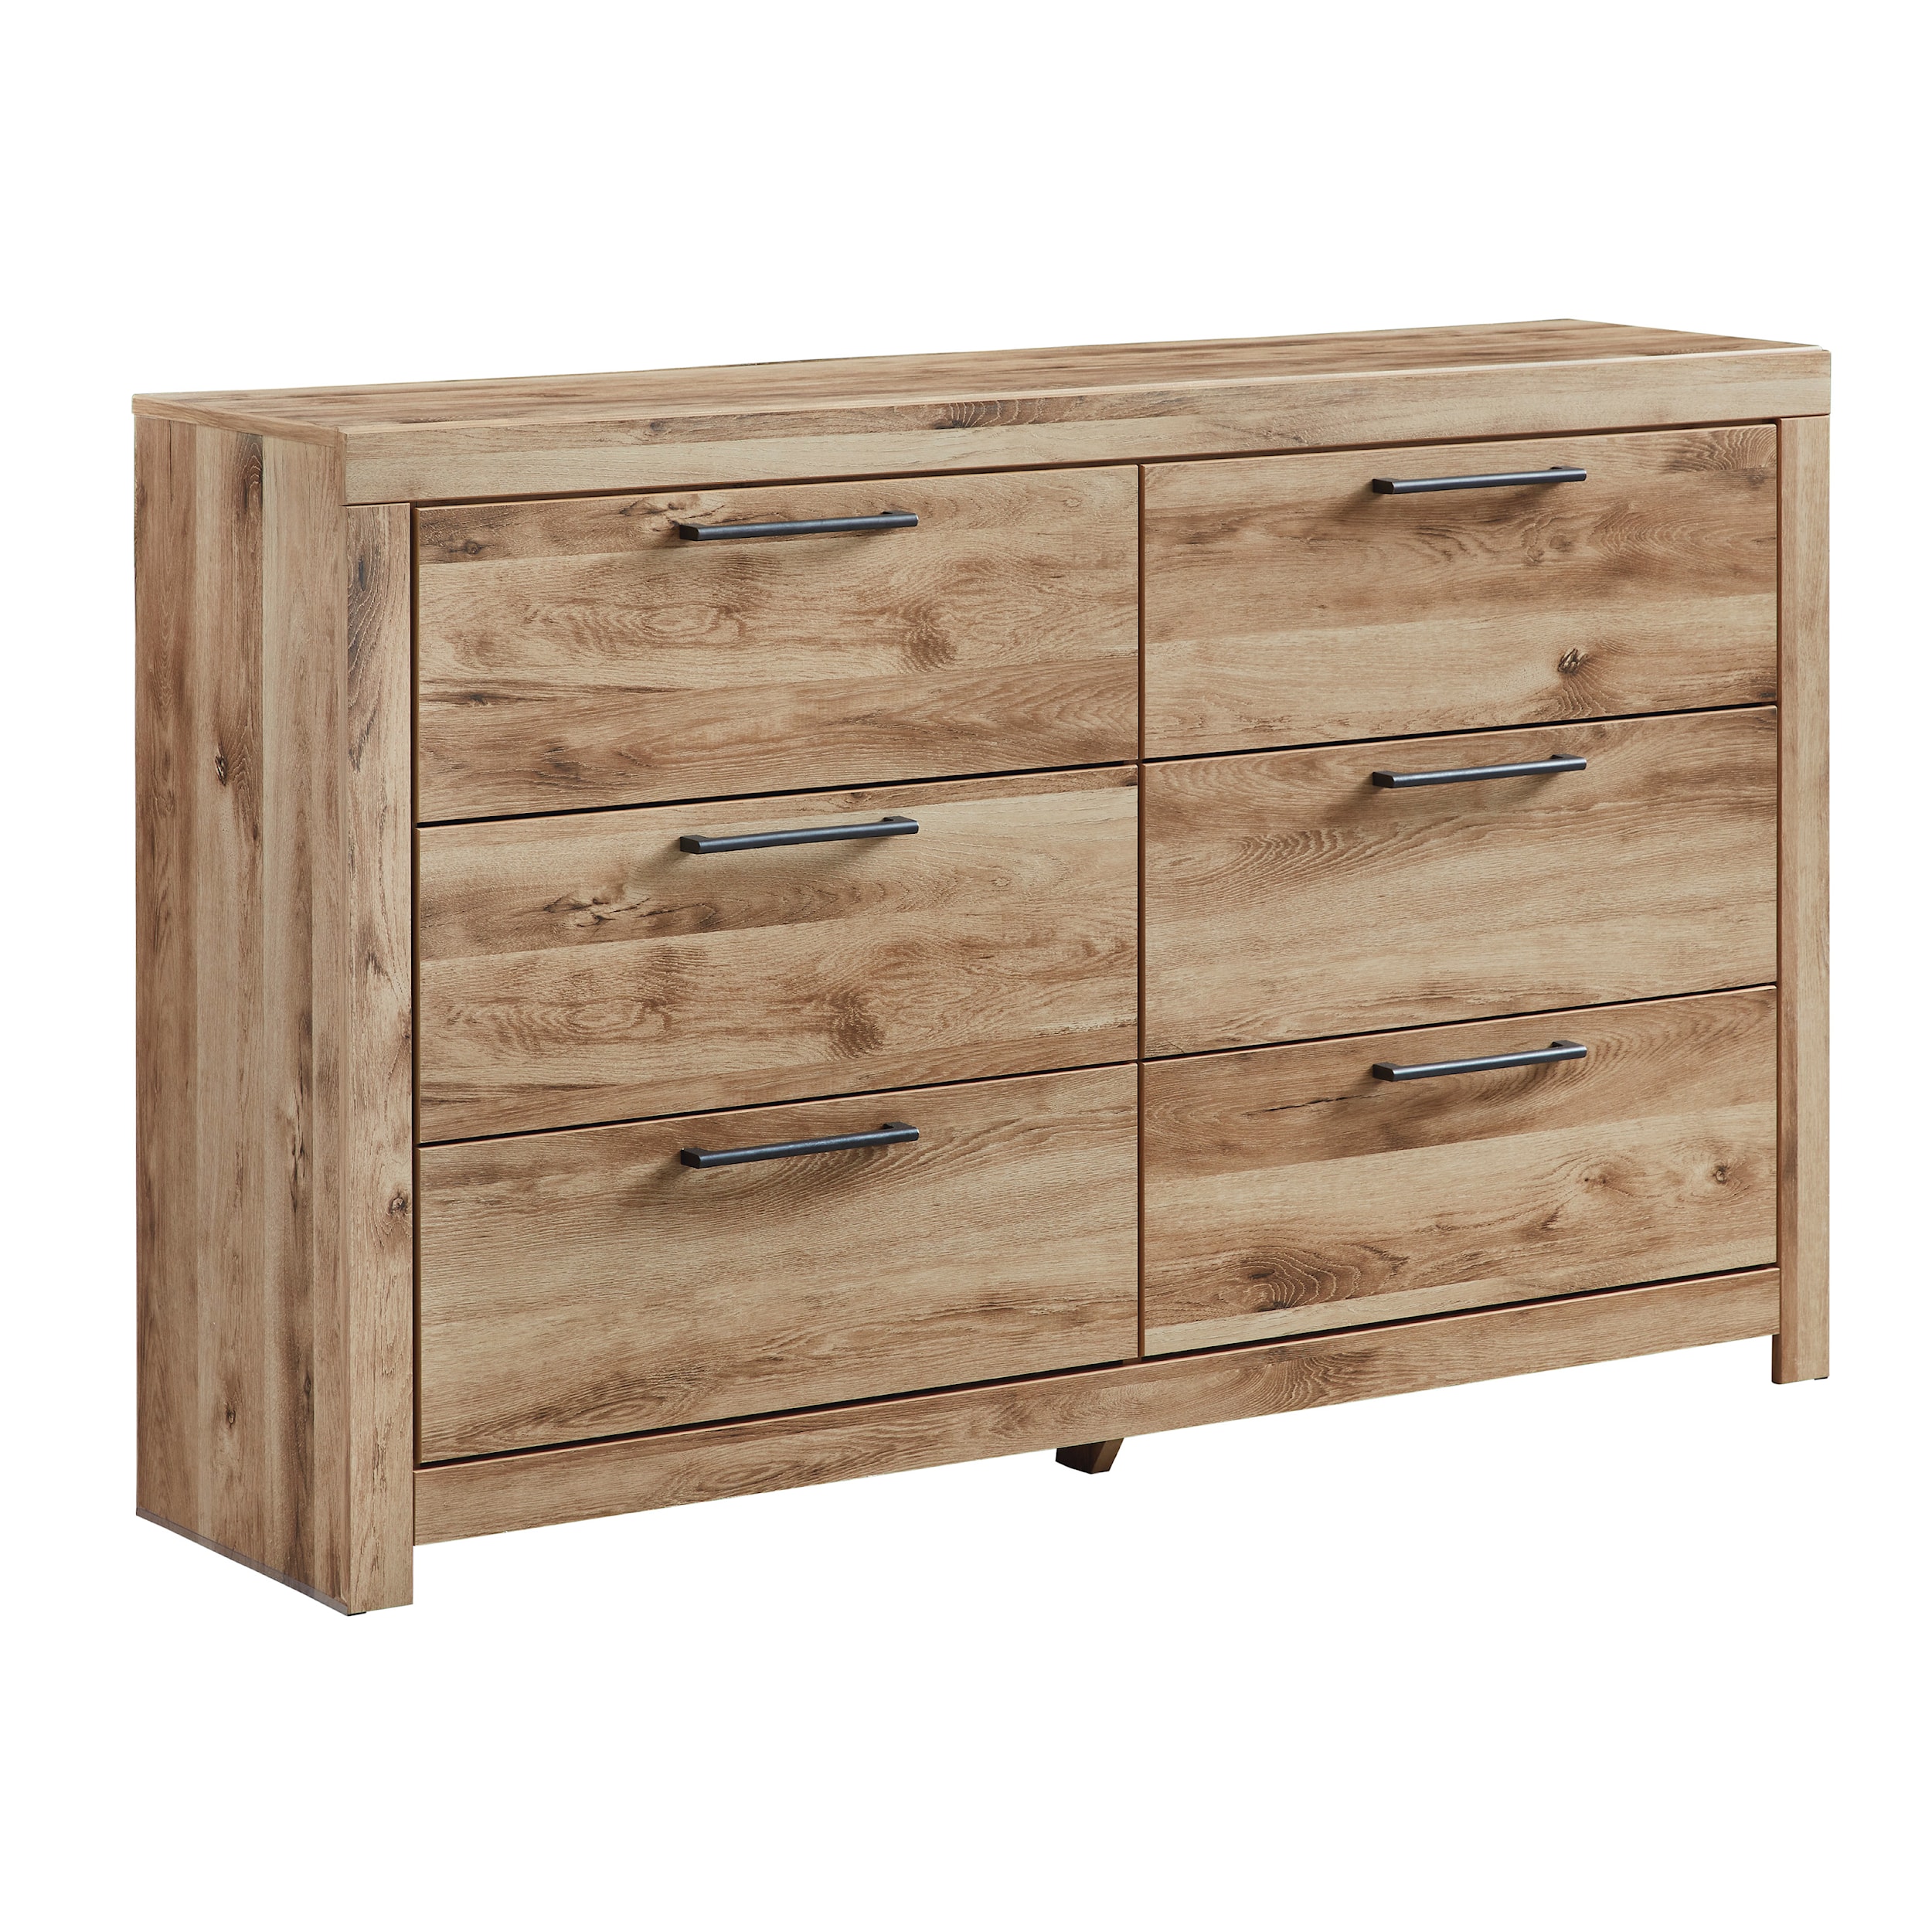 Signature Design by Ashley Hyanna B105031 Dresser with 6 Drawers